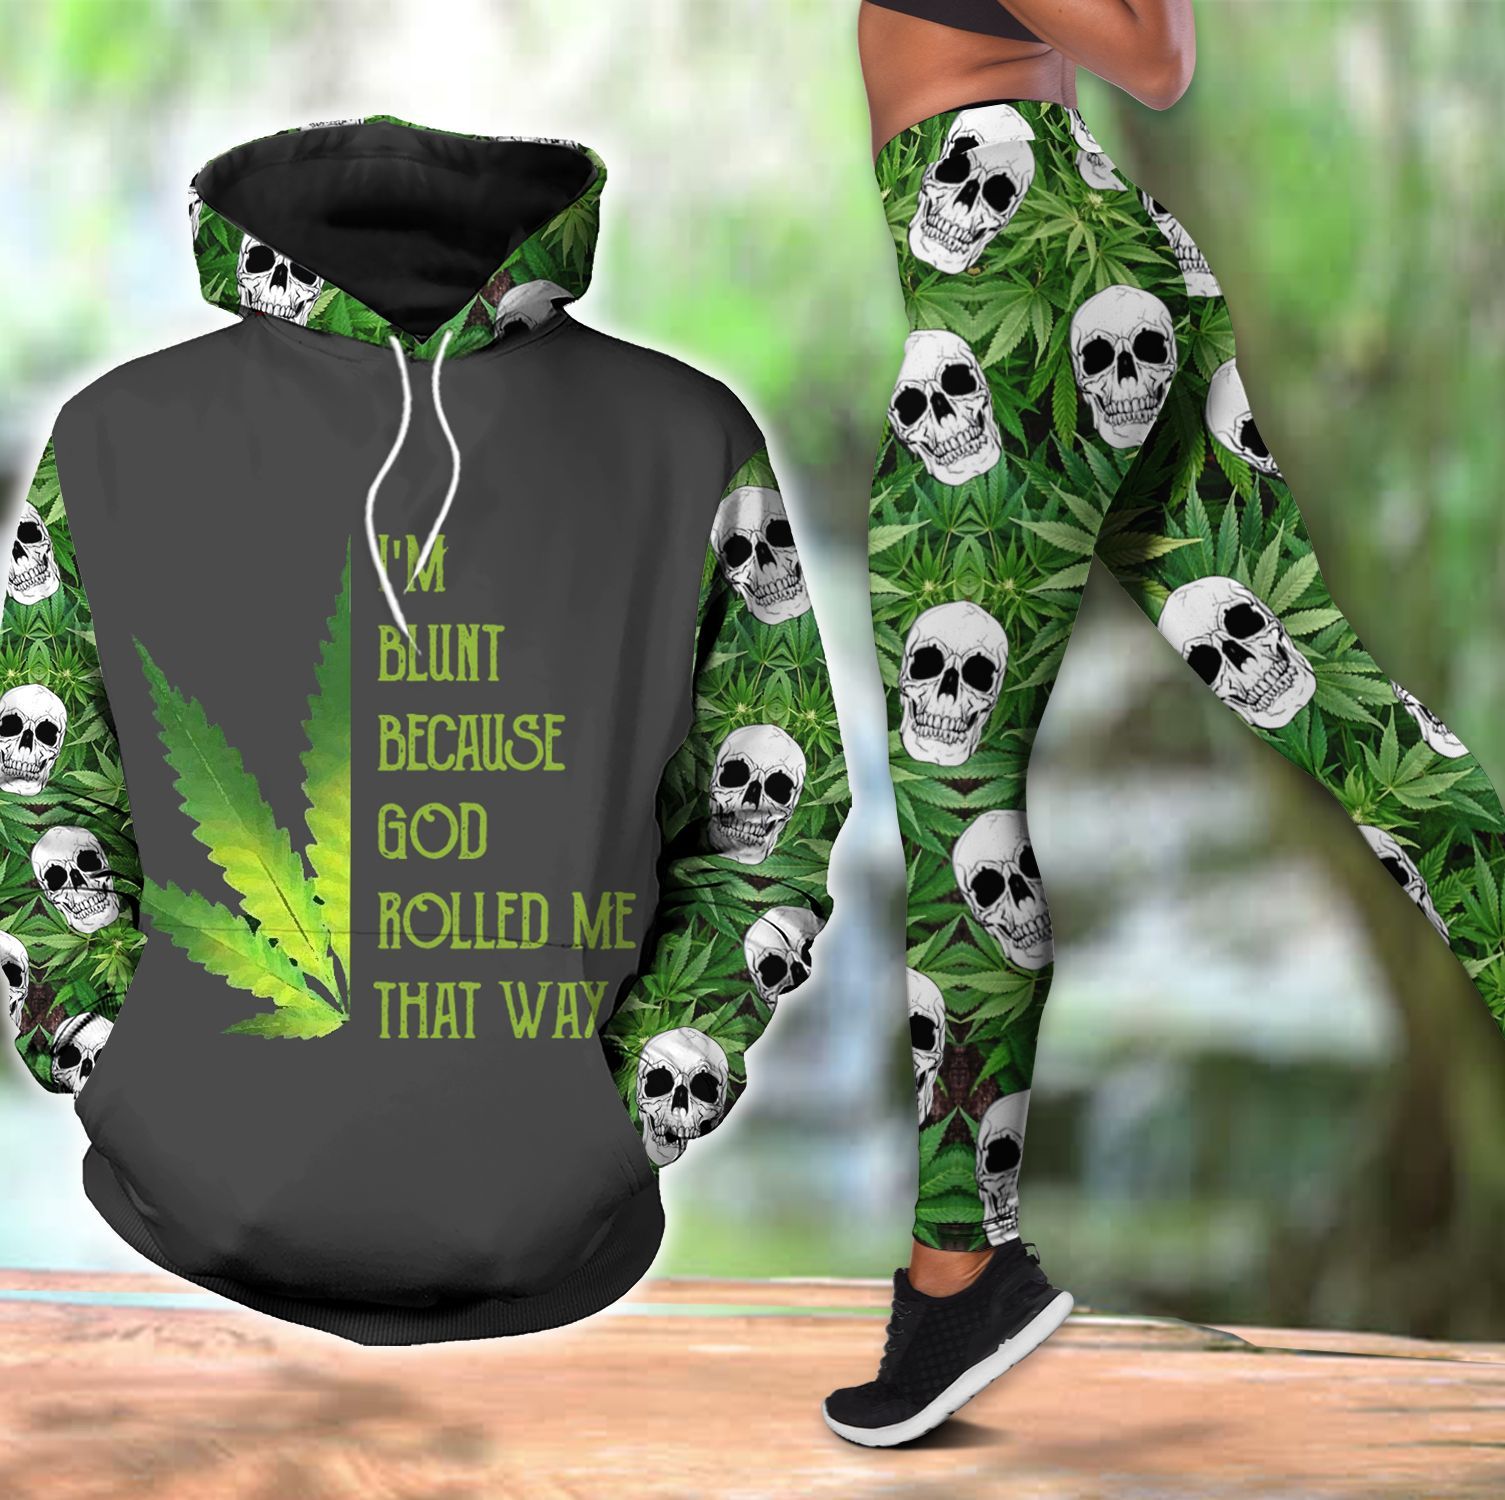 Skull I'm Blunt Because God Rolled Me That Way Weed Hoodie And Legging Set All Over Print PAN3DSET0142